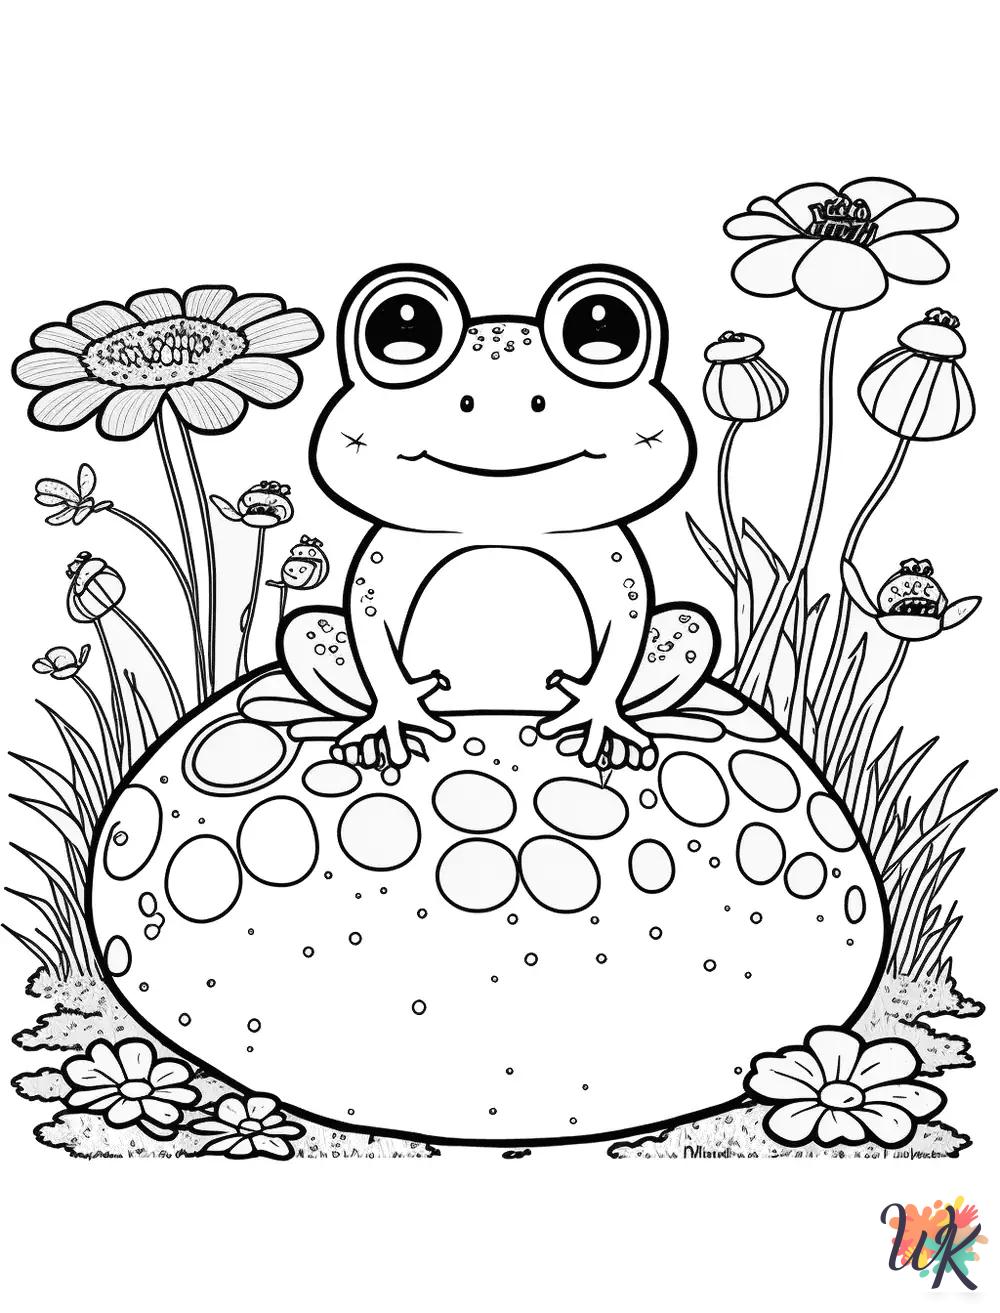 free printable Frog coloring pages for adults